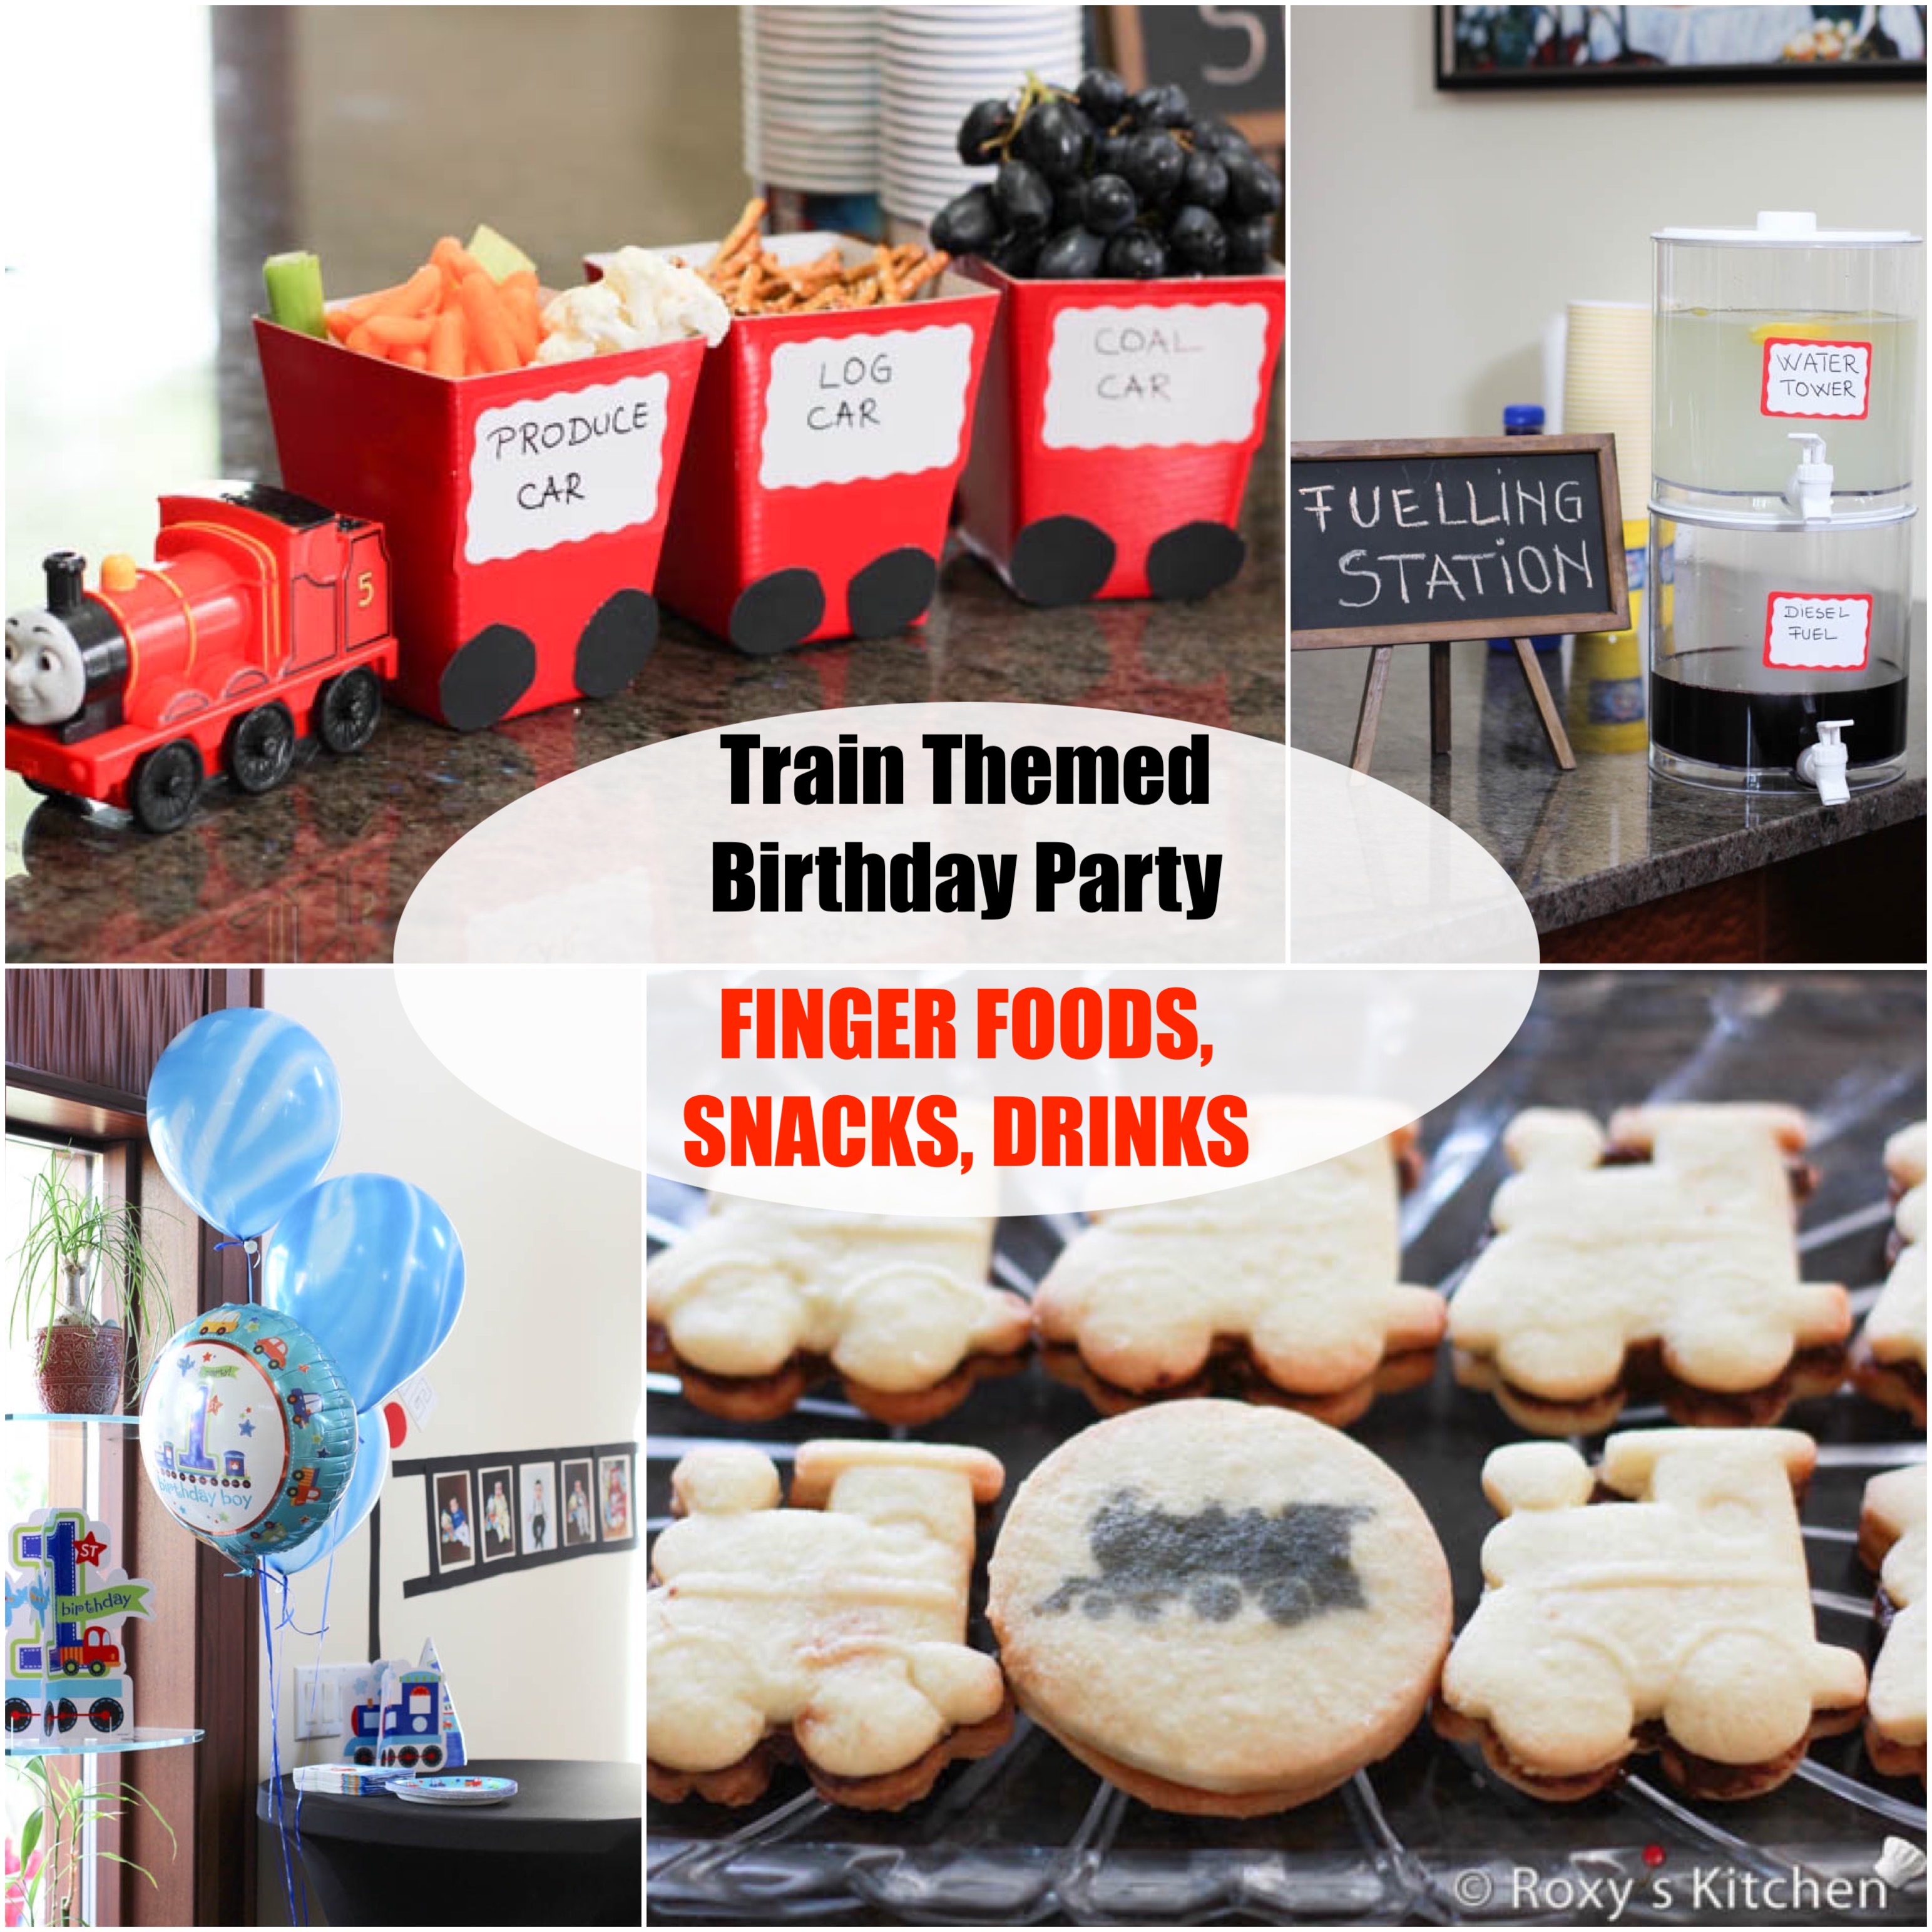 https://roxyskitchen.com/wp-content/uploads/2023/01/Train-Themed-Birthday-Party-Snacks-Drinks-Finger-Foods-Collage-Title.jpg